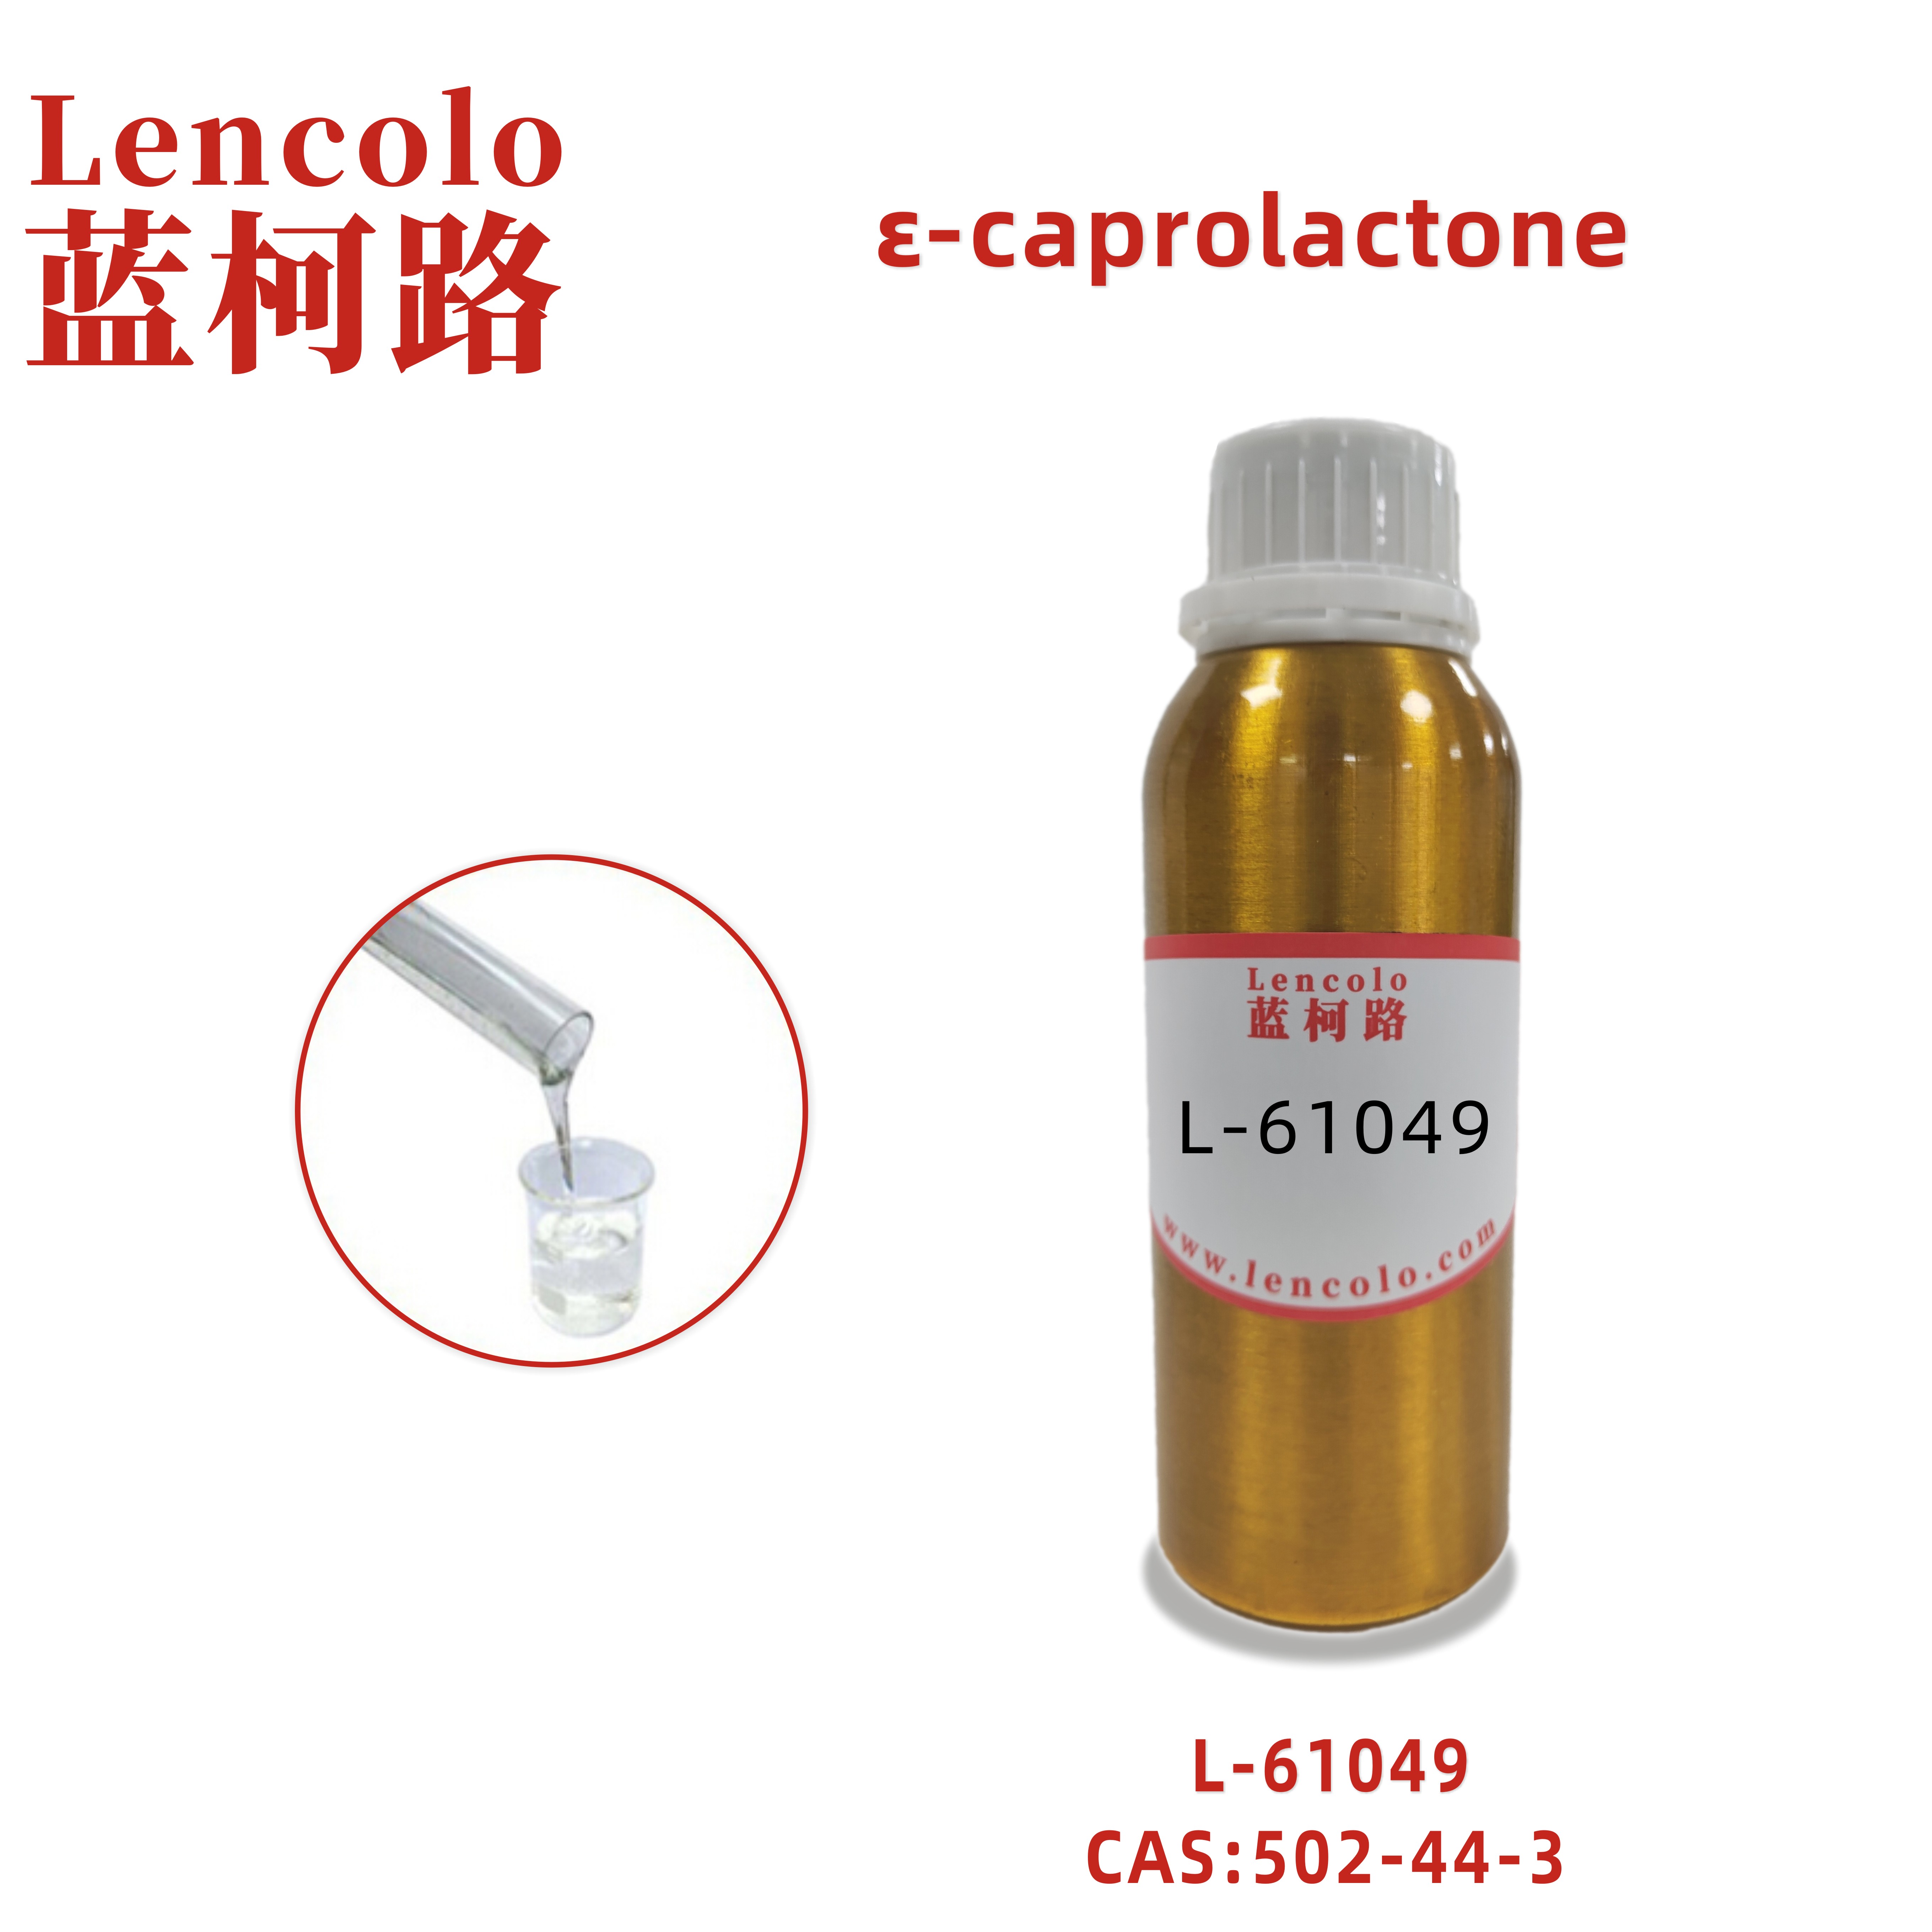 L-61049 ε-caprolactone uv monomer Improve gloss and weather resistance for uv coating CAS 502-44-3